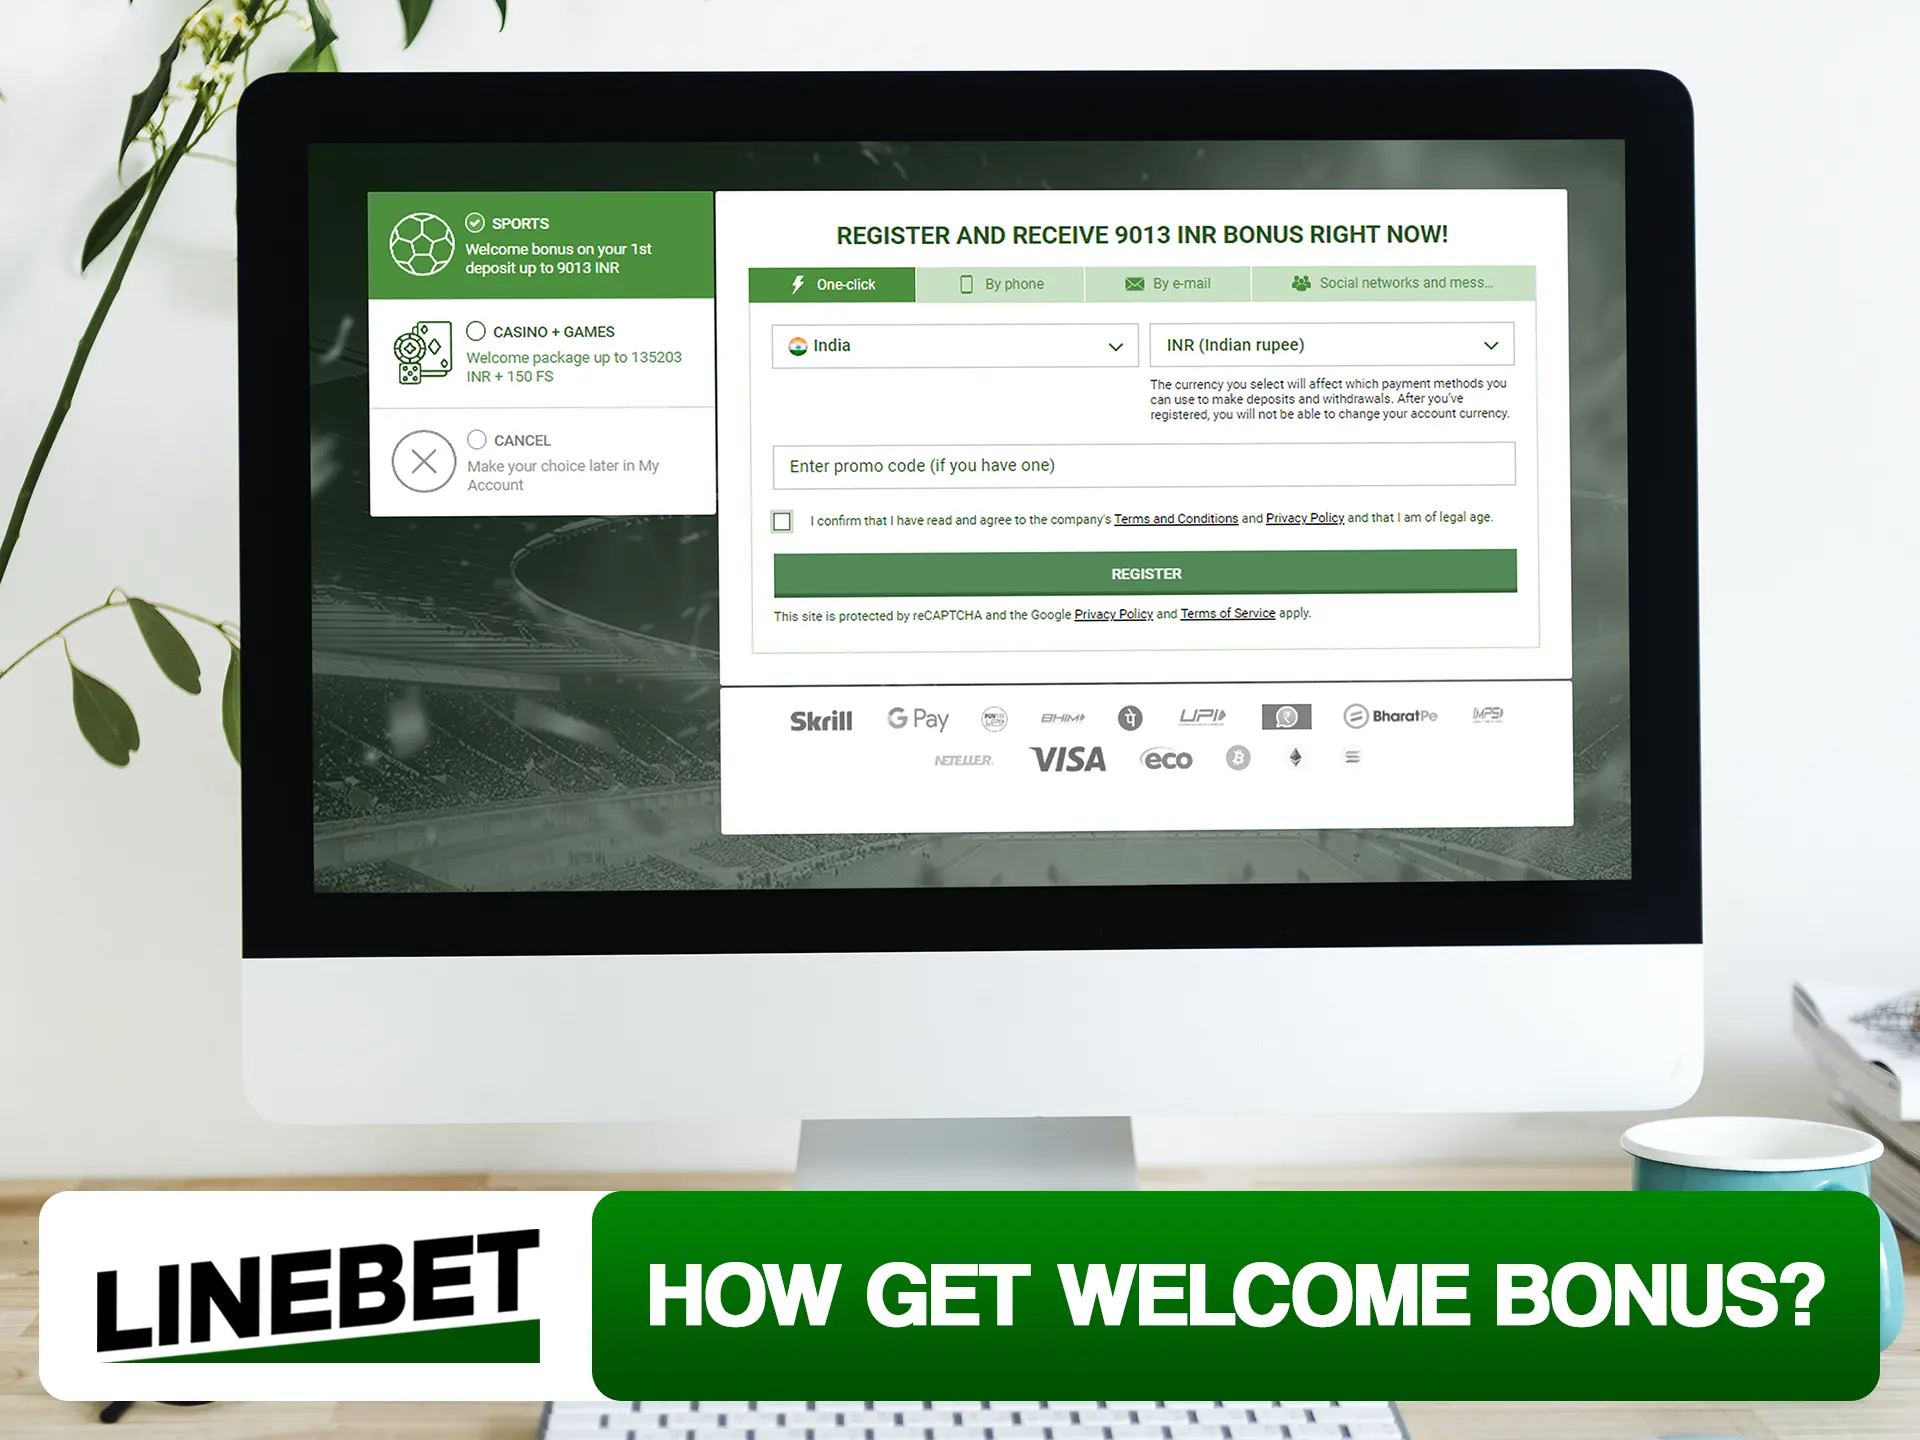 Get your Linebet welcome bonus after succesfull registration of new account.